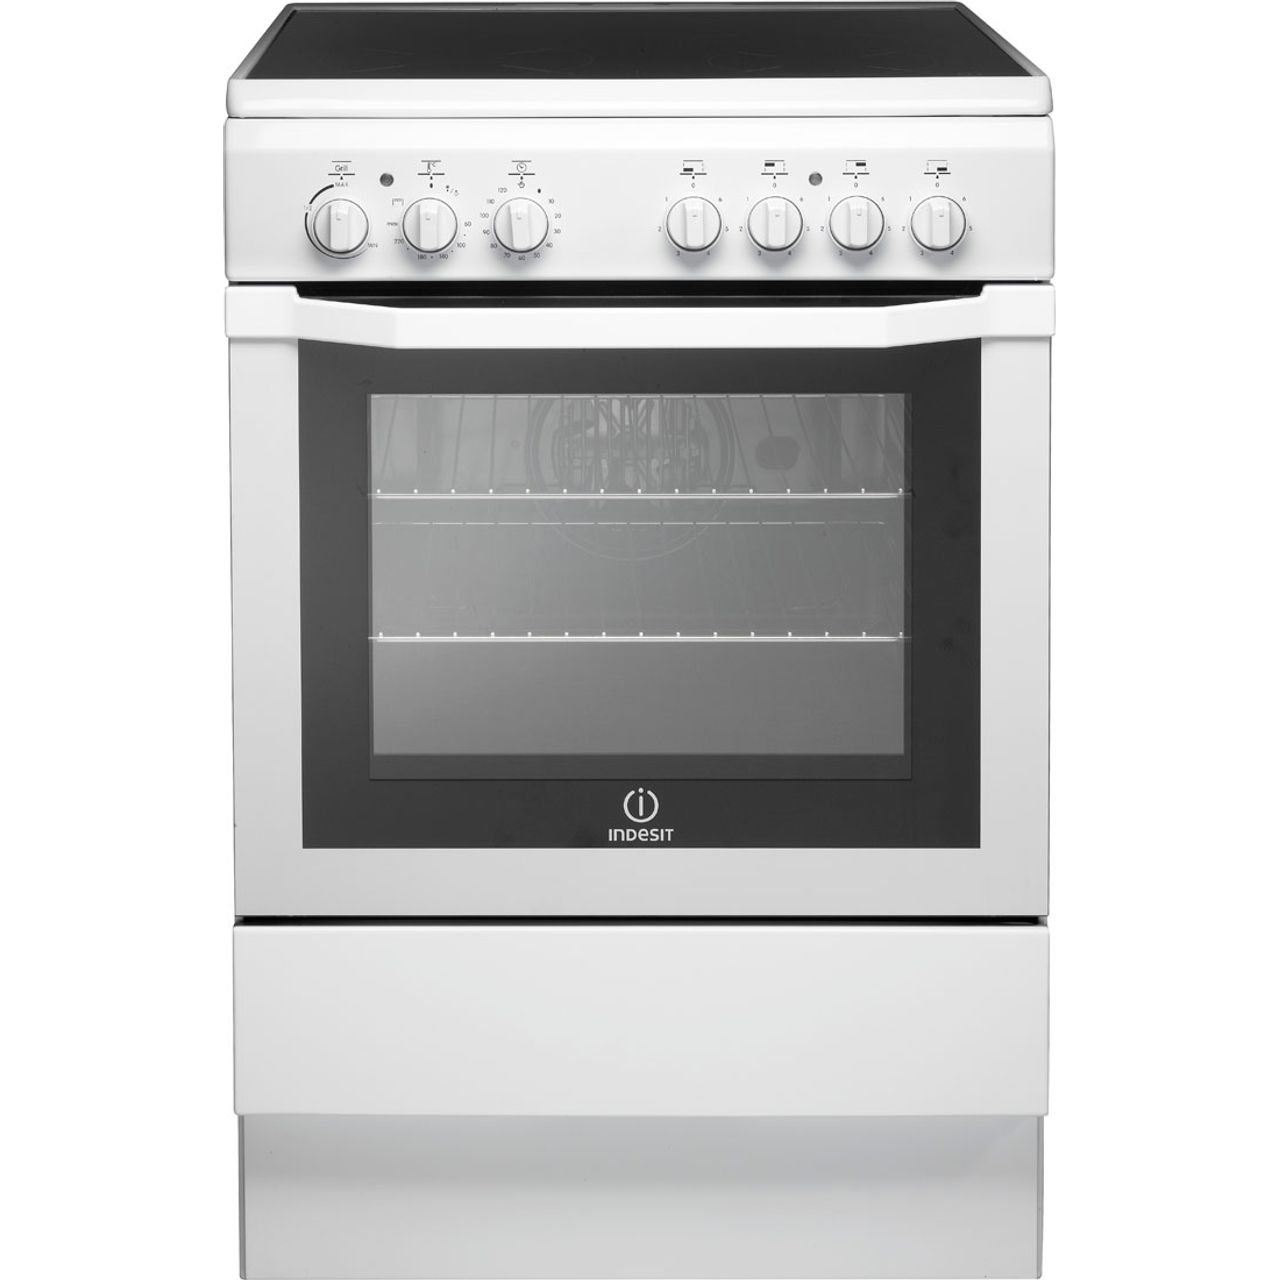 I6vv2aw Wh Indesit Electric Cooker Ao Com